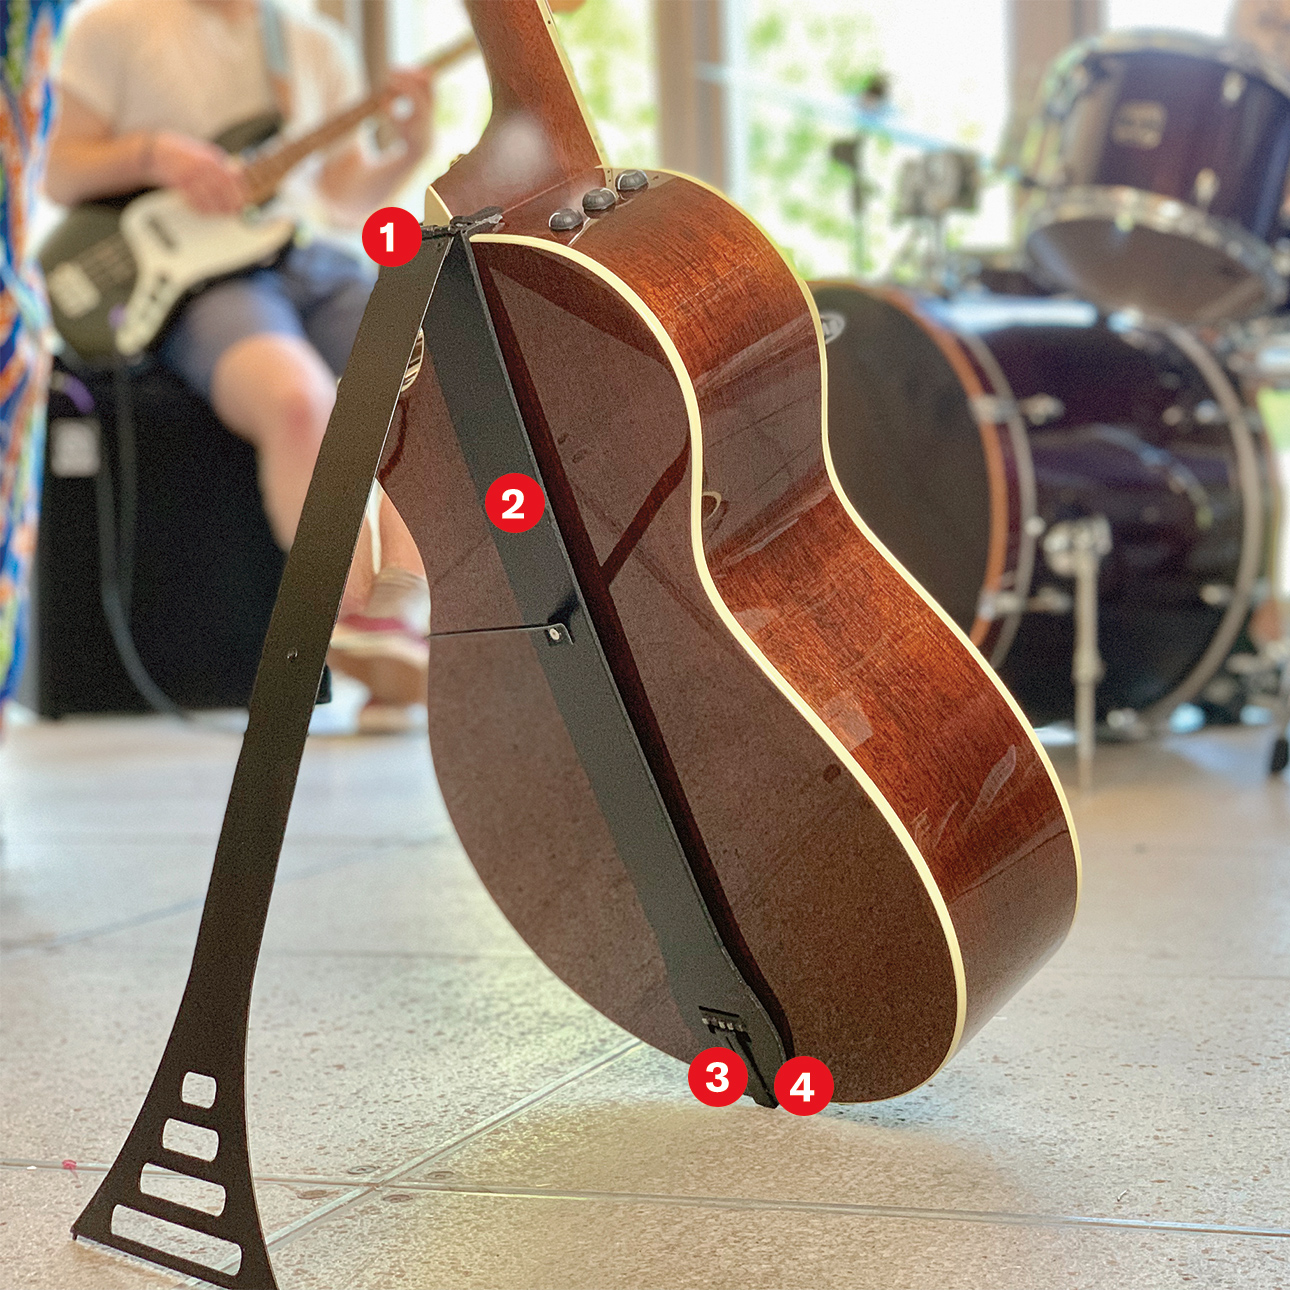 guitar stand annotate